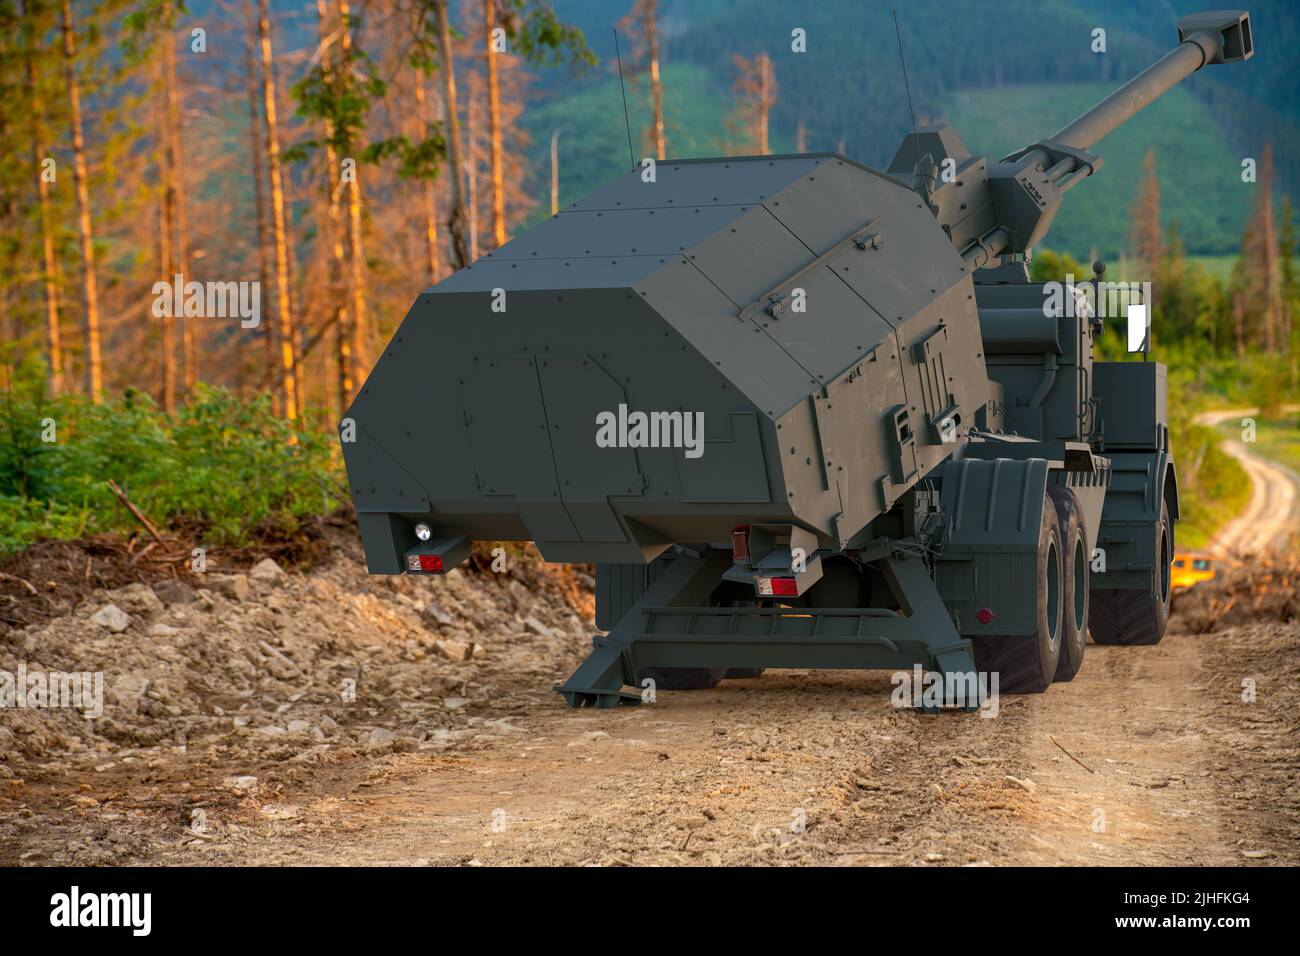 Archer Artillery System, or Archer – FH77BW L52, or Artillerisystem 08 is an international project aimed at developing a next-generation self-propelle Stock Photo